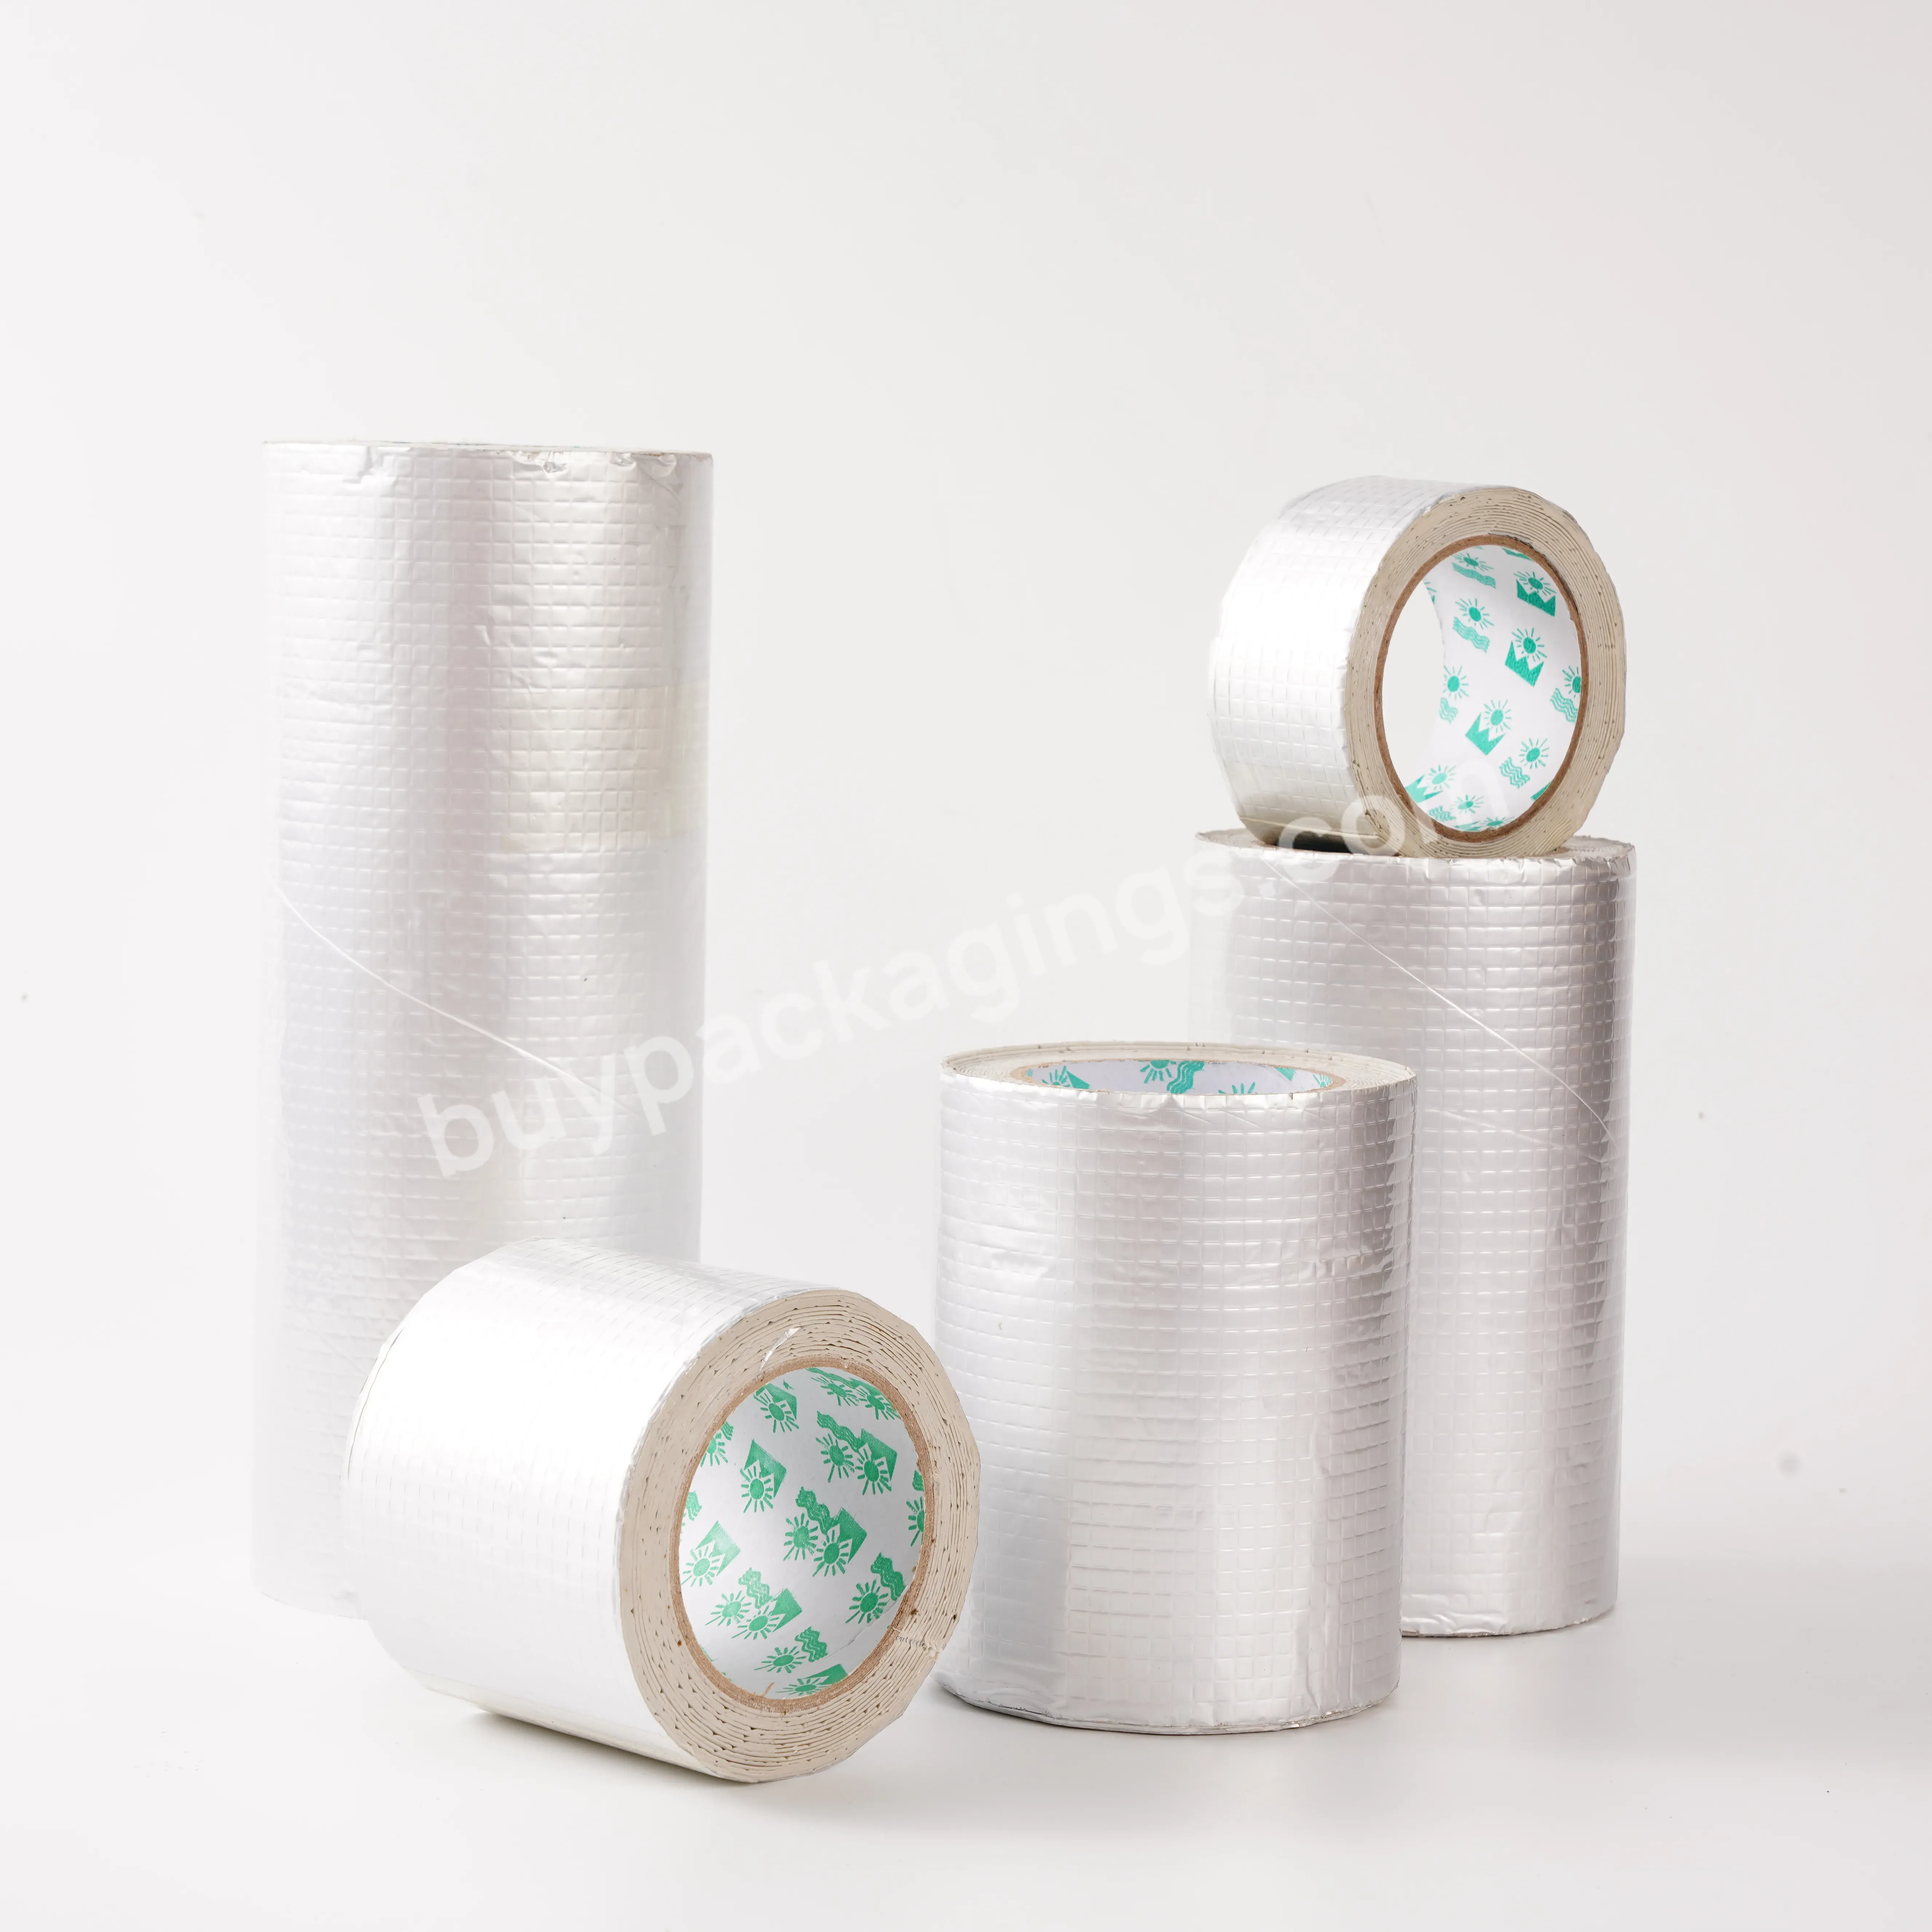 High-quality Butyl Aluminum Foil Super Waterproof Self-adhesive Tape Used For Roof And Rain Leak Repair - Buy Super Waterproof Tape,Waterproof Repair Tape,Waterproof Aluminium Adhesive Tape.